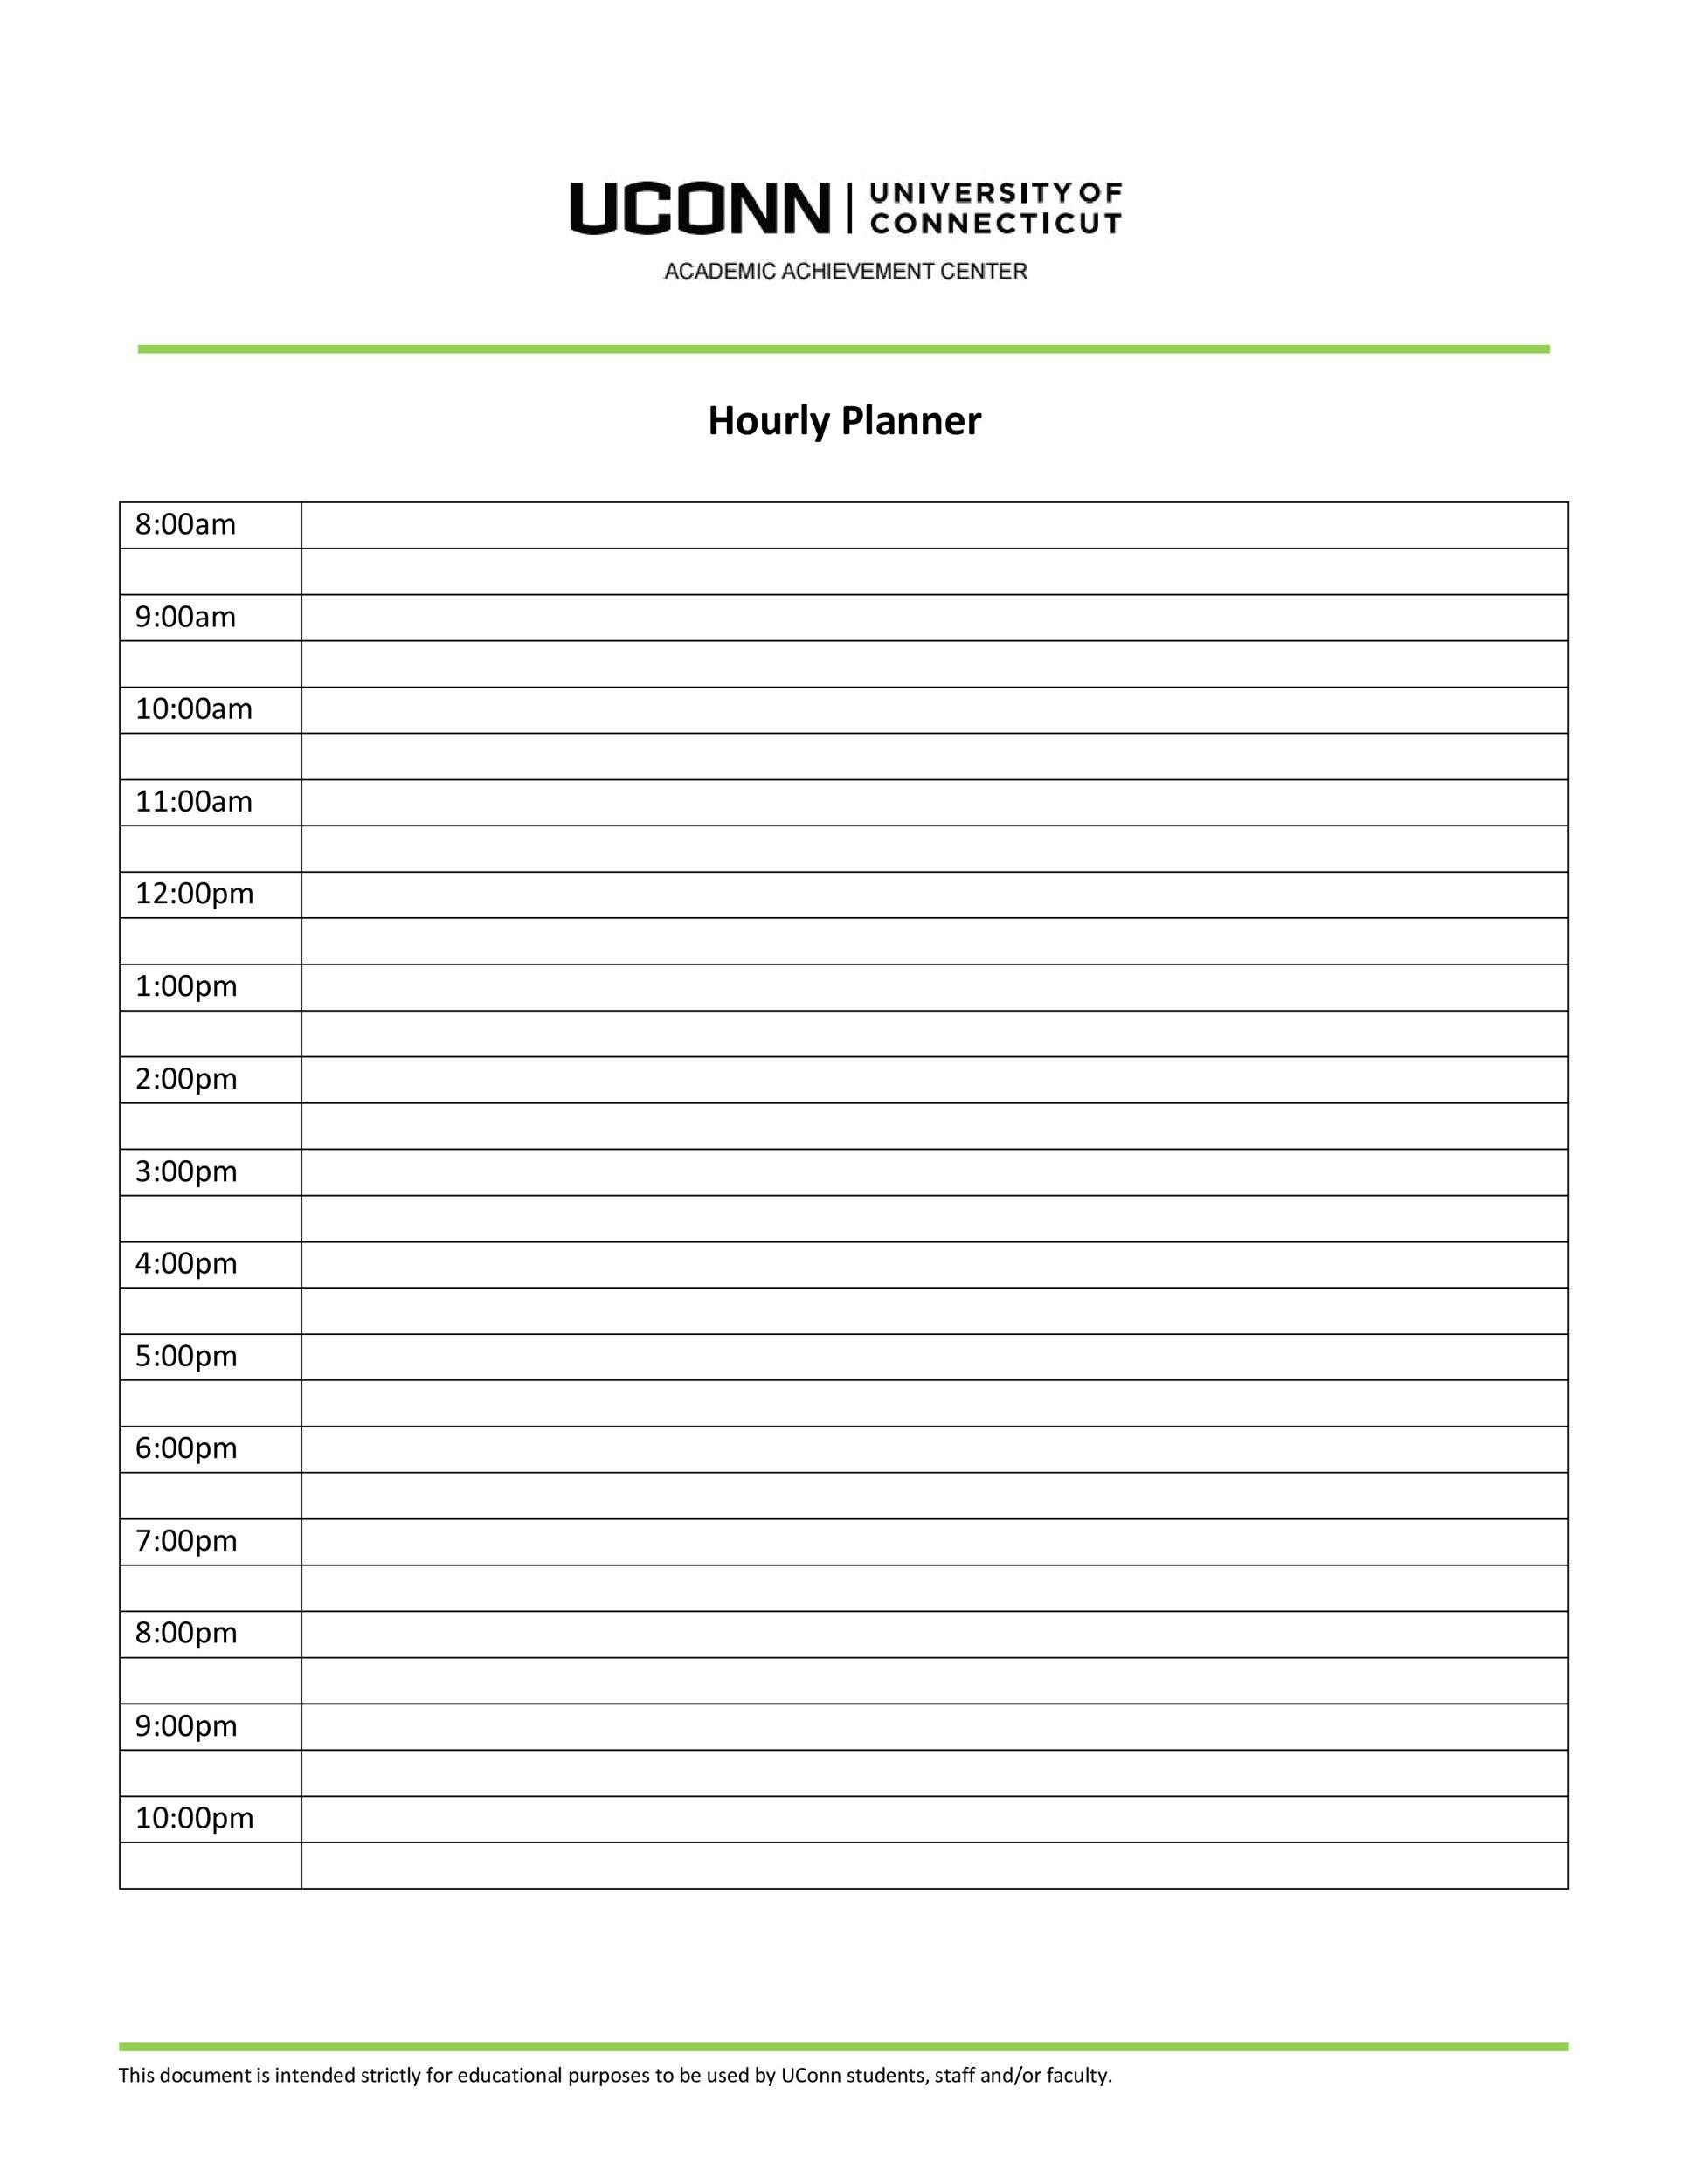 printable daily hourly schedule template 13